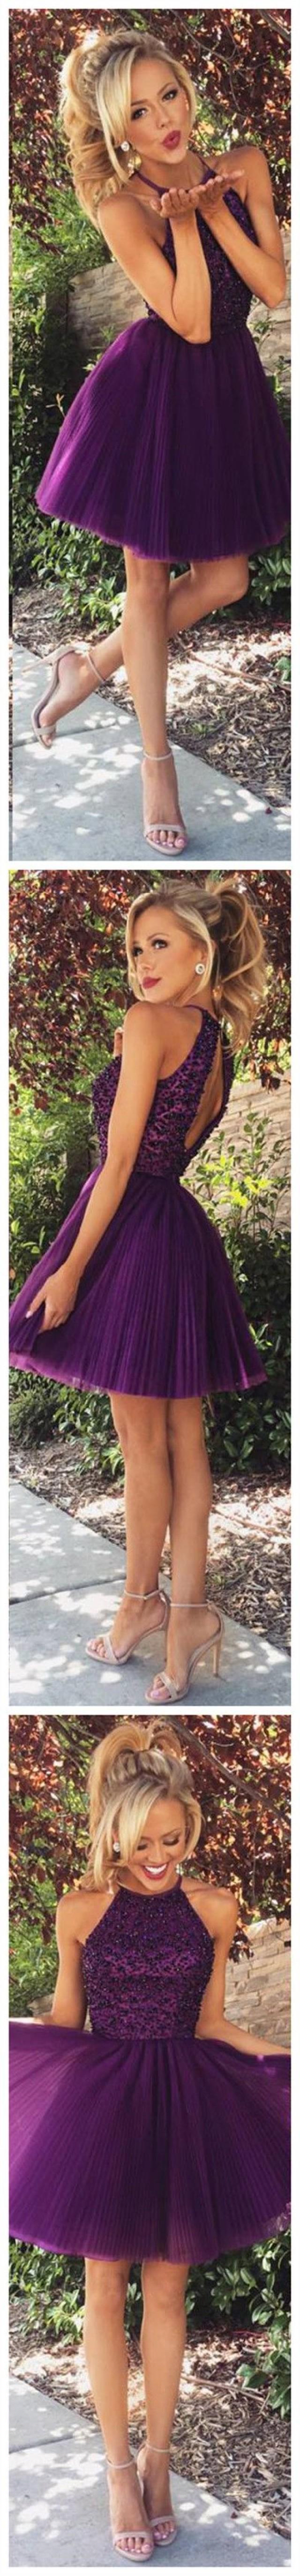 wedding photo - A-line High Neck Black Beaded Bodice Grape Tulle Short Prom Homecoming Dresses APD1557 From DiyDressonline